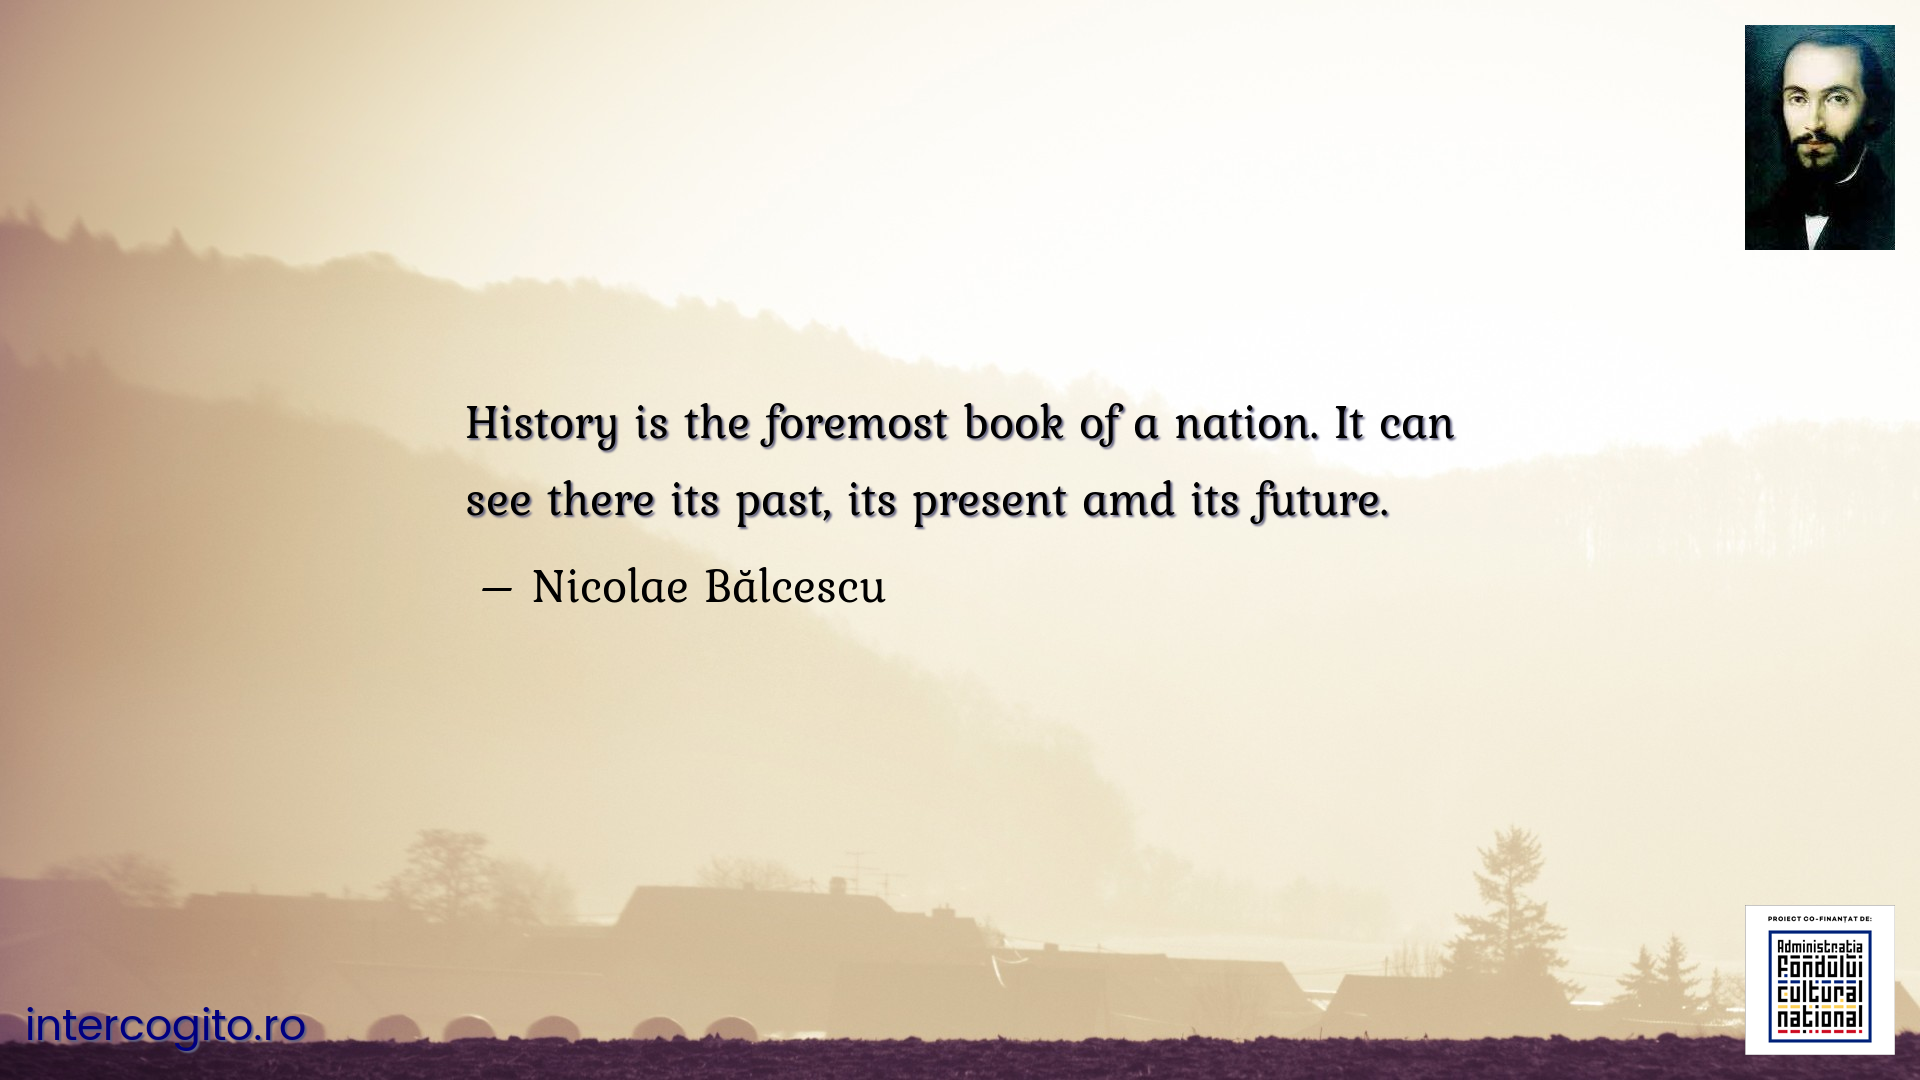 History is the foremost book of a nation. It can see there its past, its present amd its future.